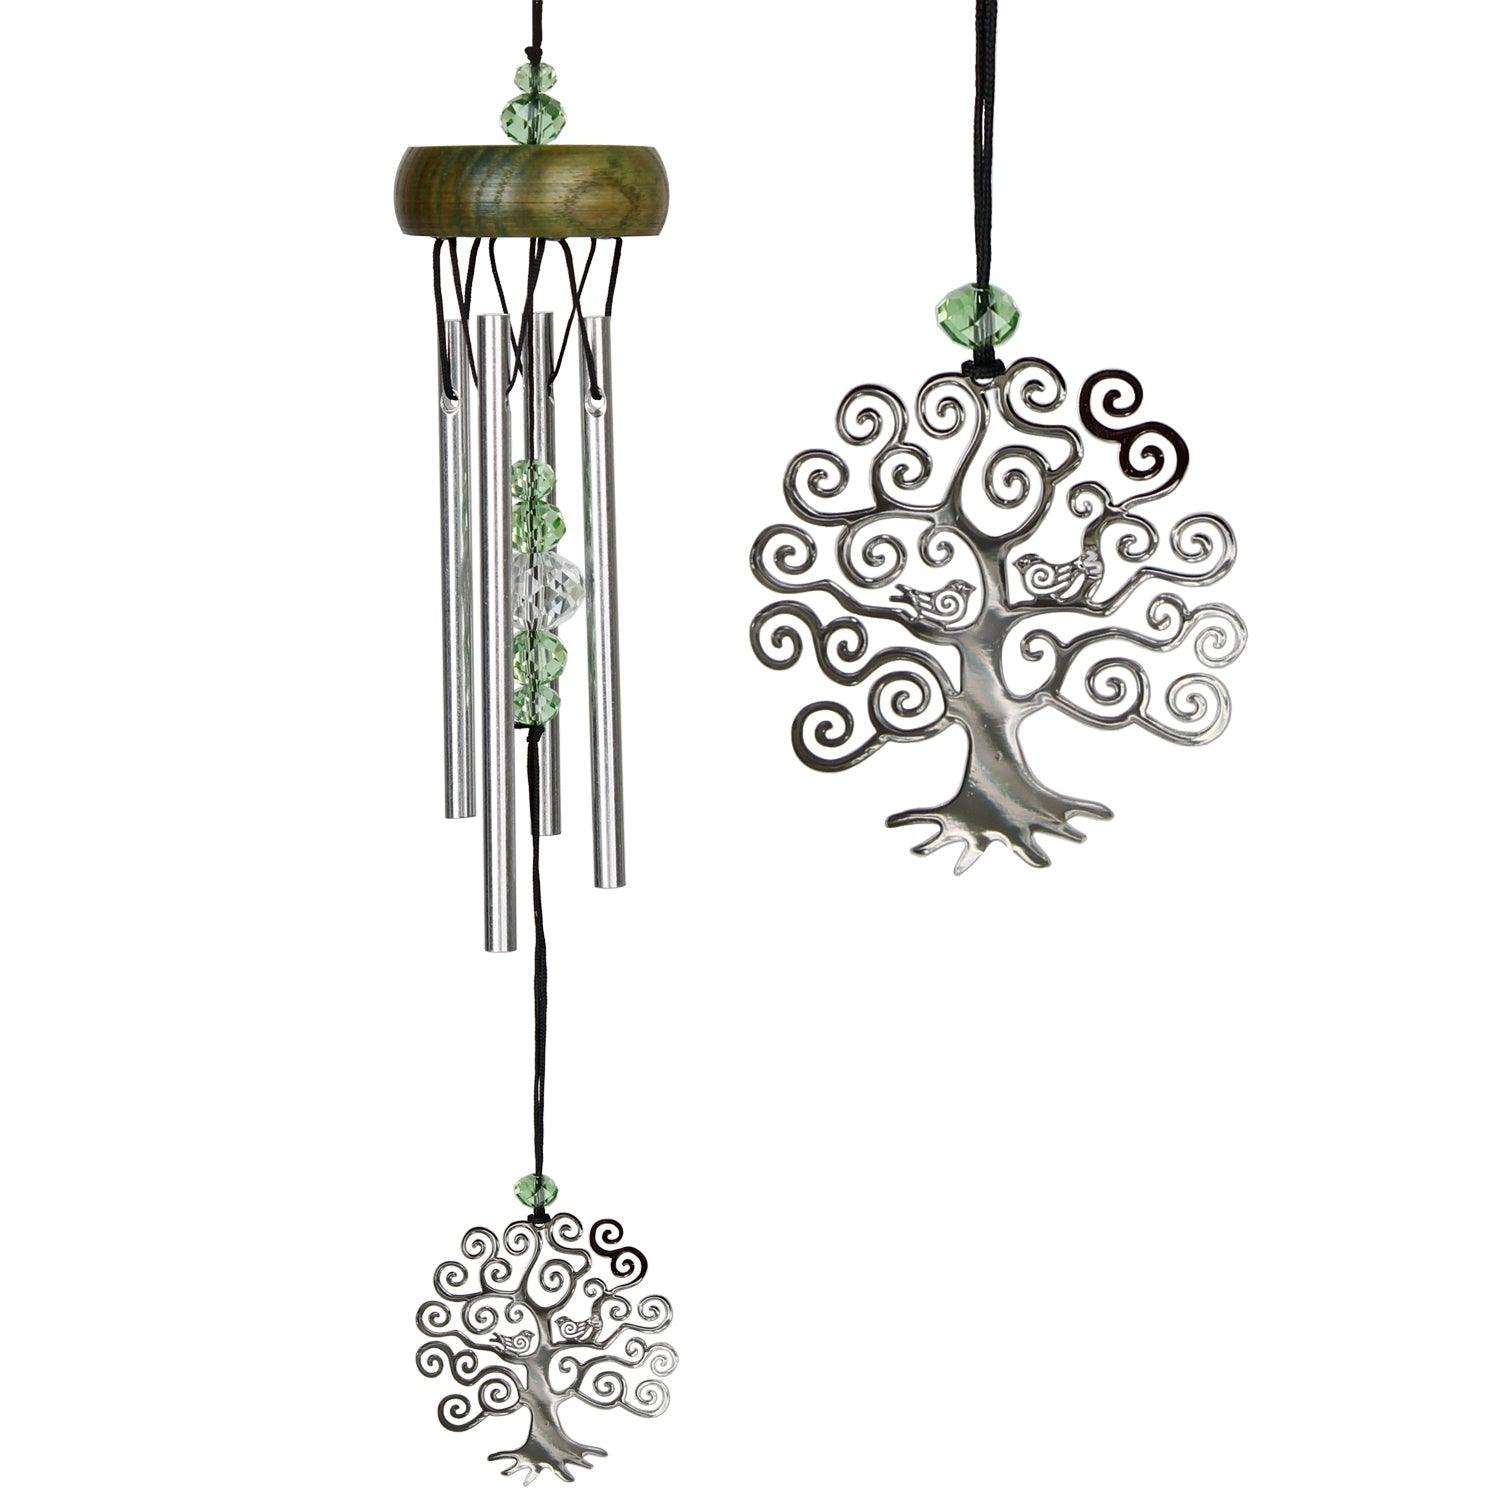 A sleek and friendly green finish on durable ash wood, complemented by four solid silver aluminum rods and sparkling crystal accents. Measures 10 inches in length and 2 inches in diameter.